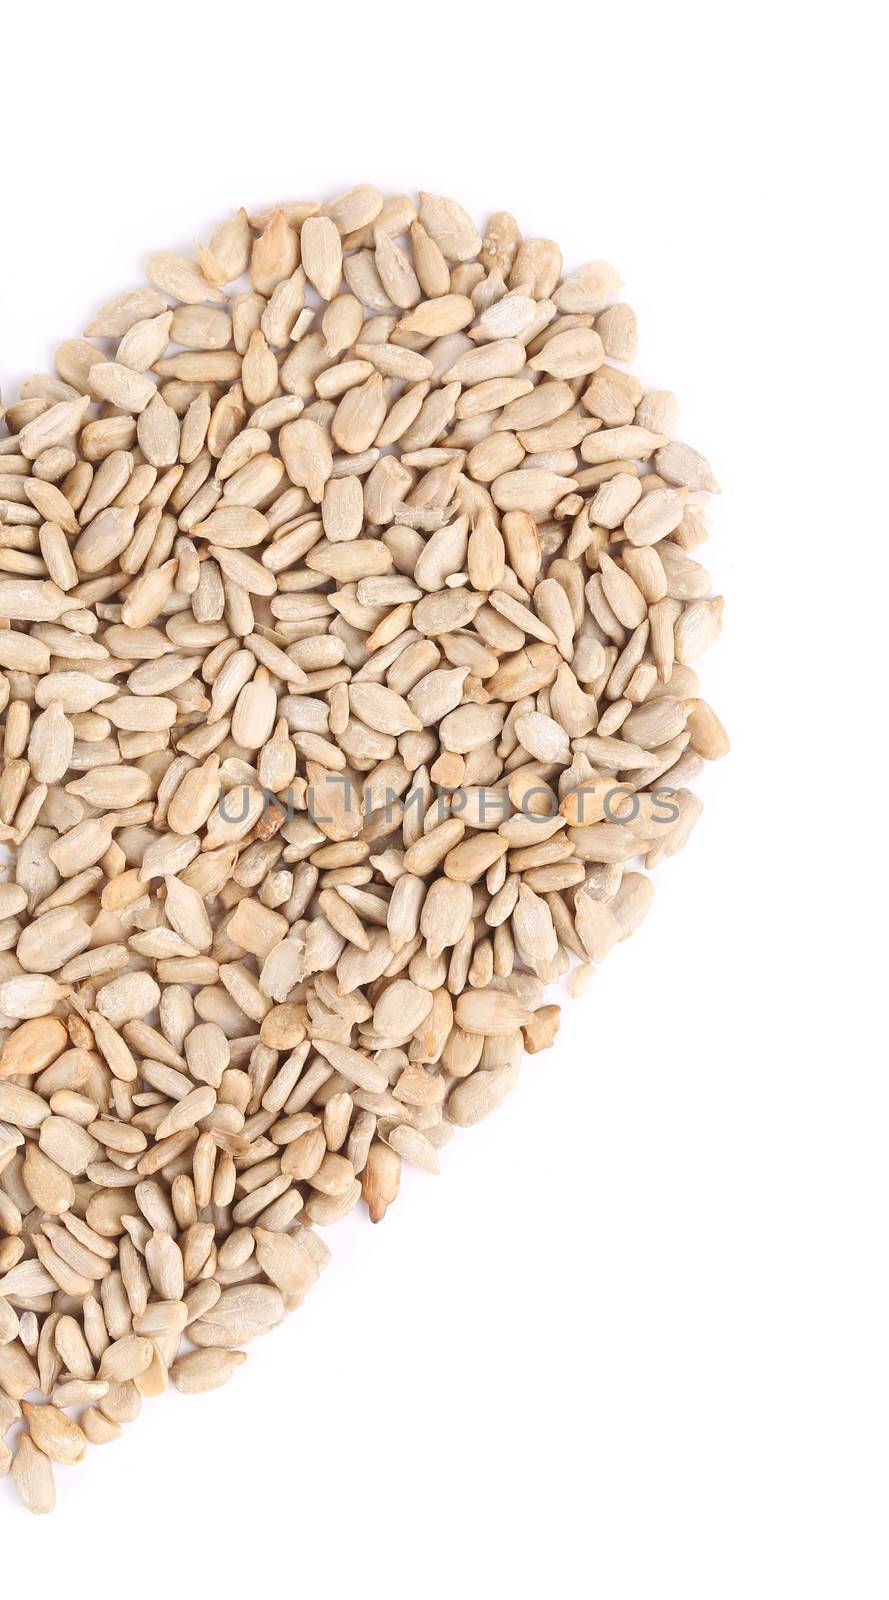 Sunflower seeds in the shape of heart. Isolated on a white background.